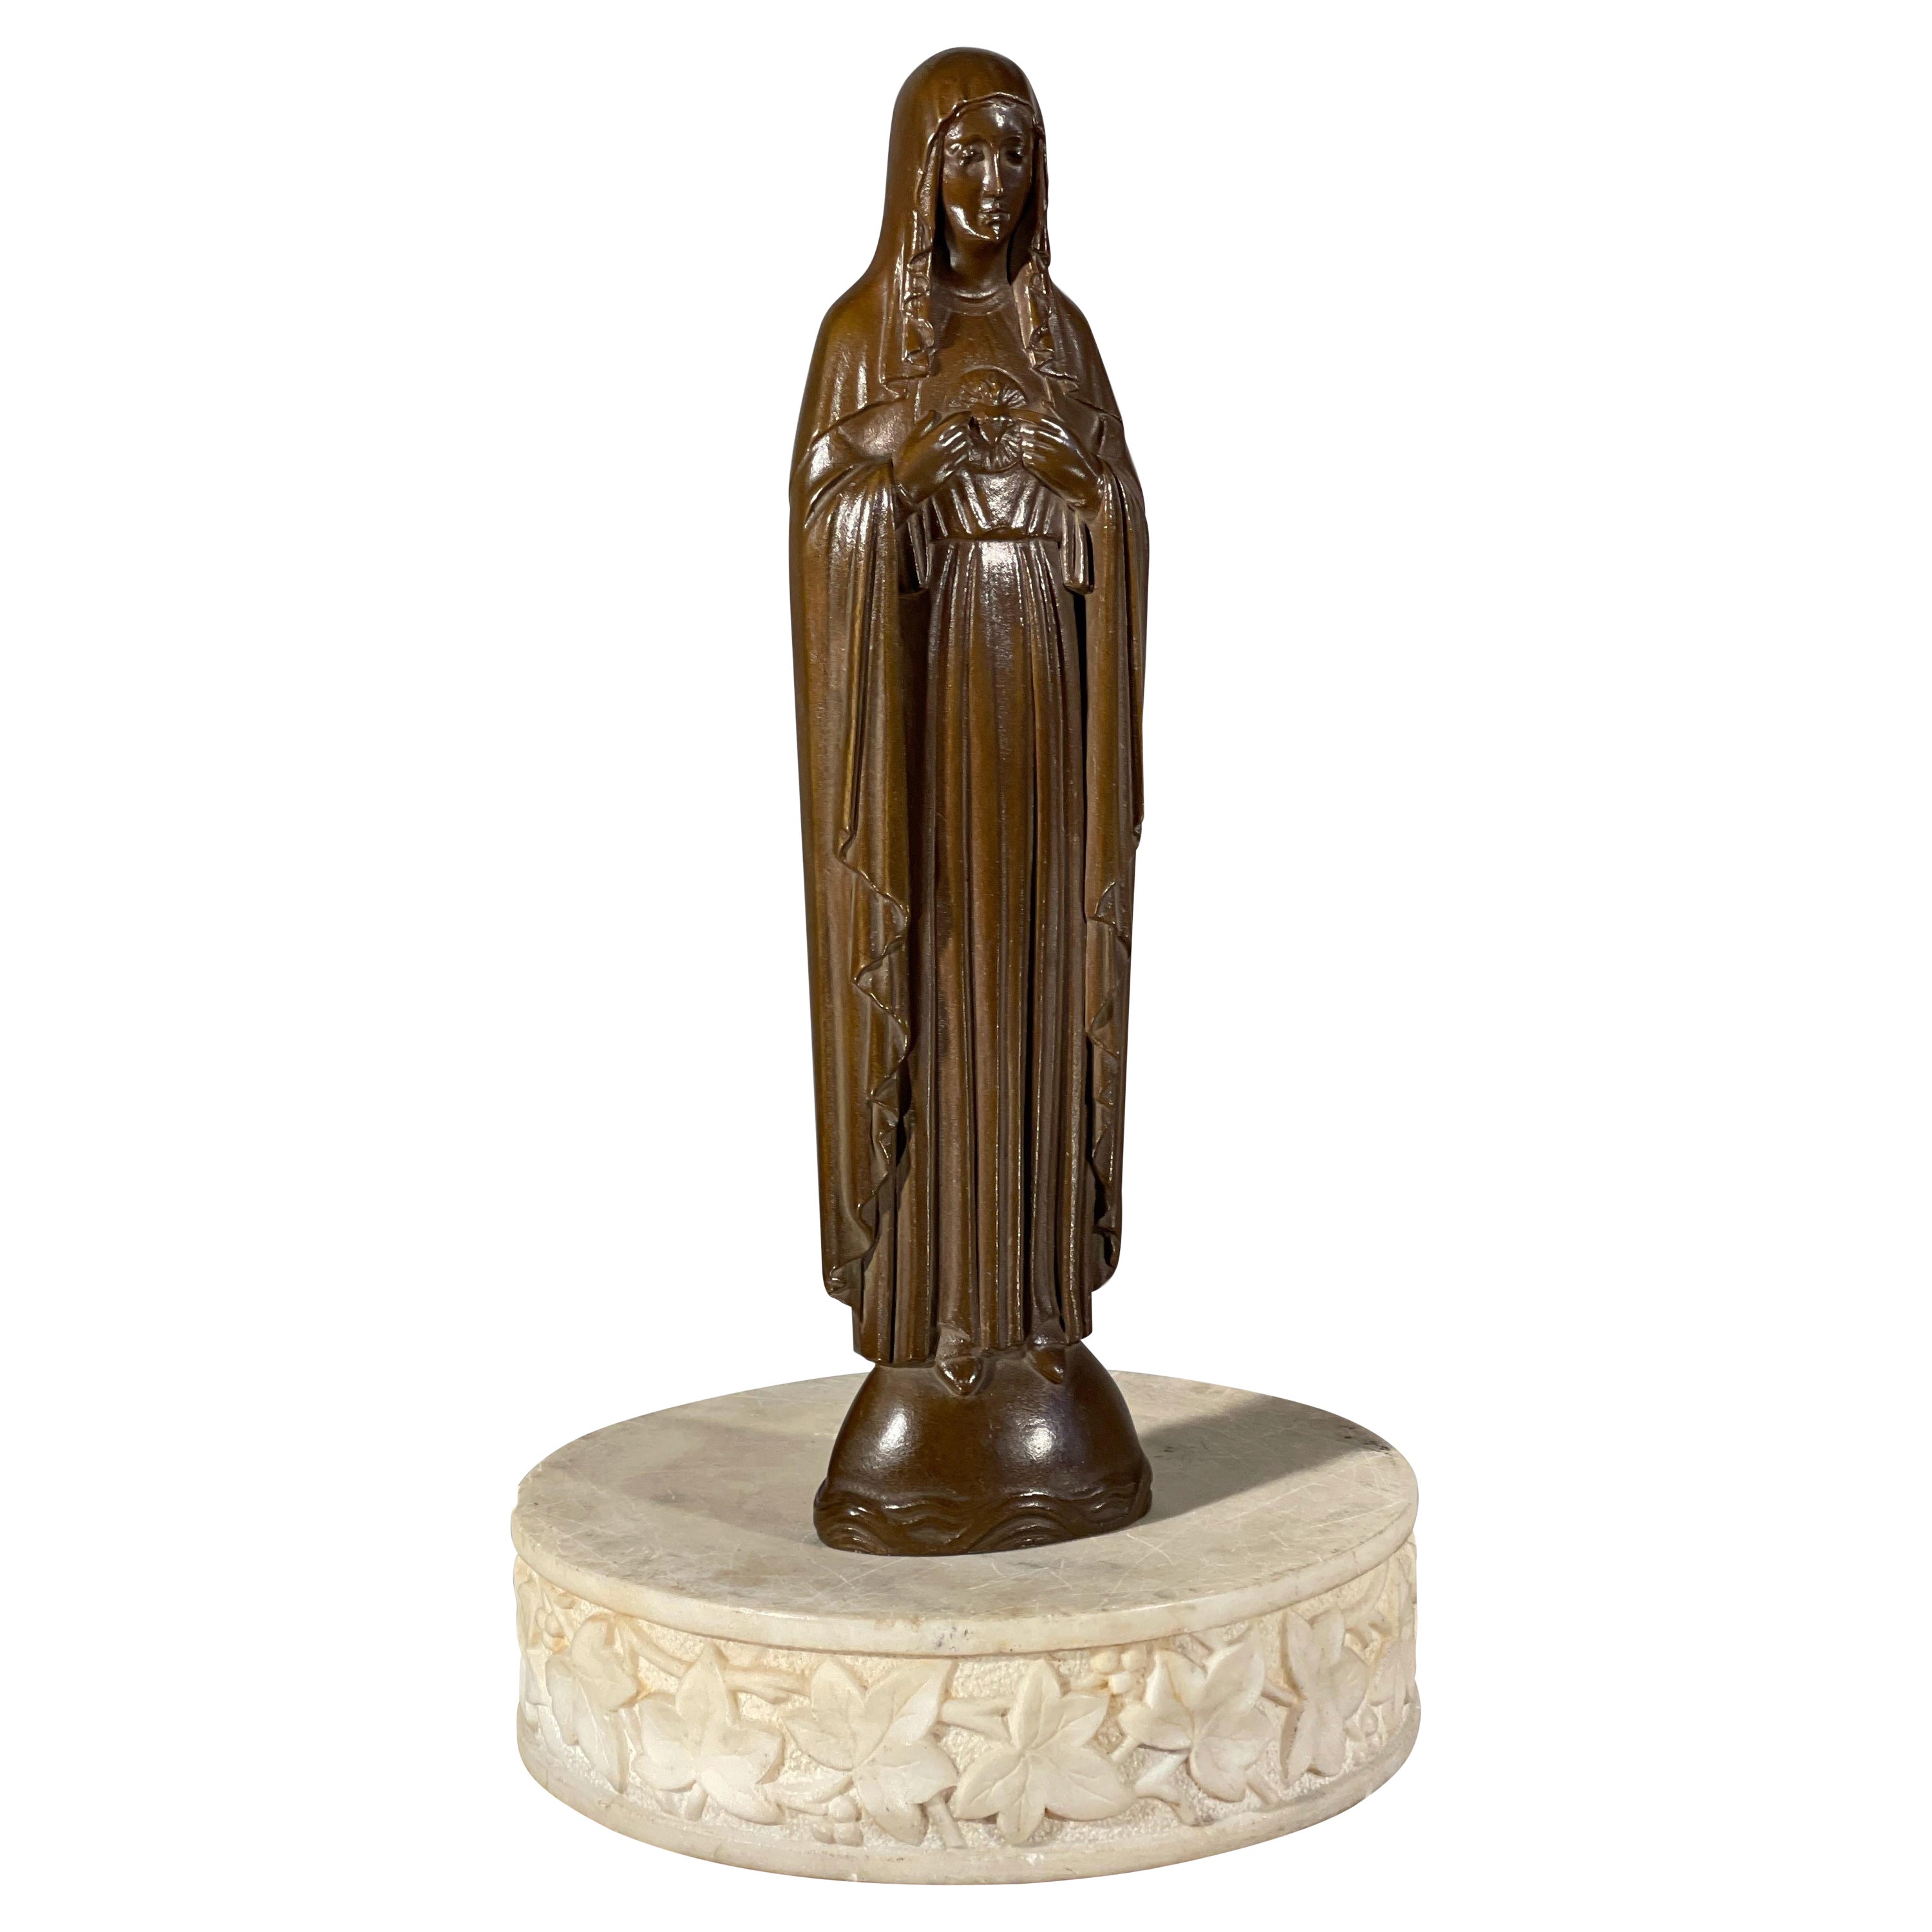 Rare Patinated Antique Bronze Sculpture of the Immaculate Heart of Virgin Mary